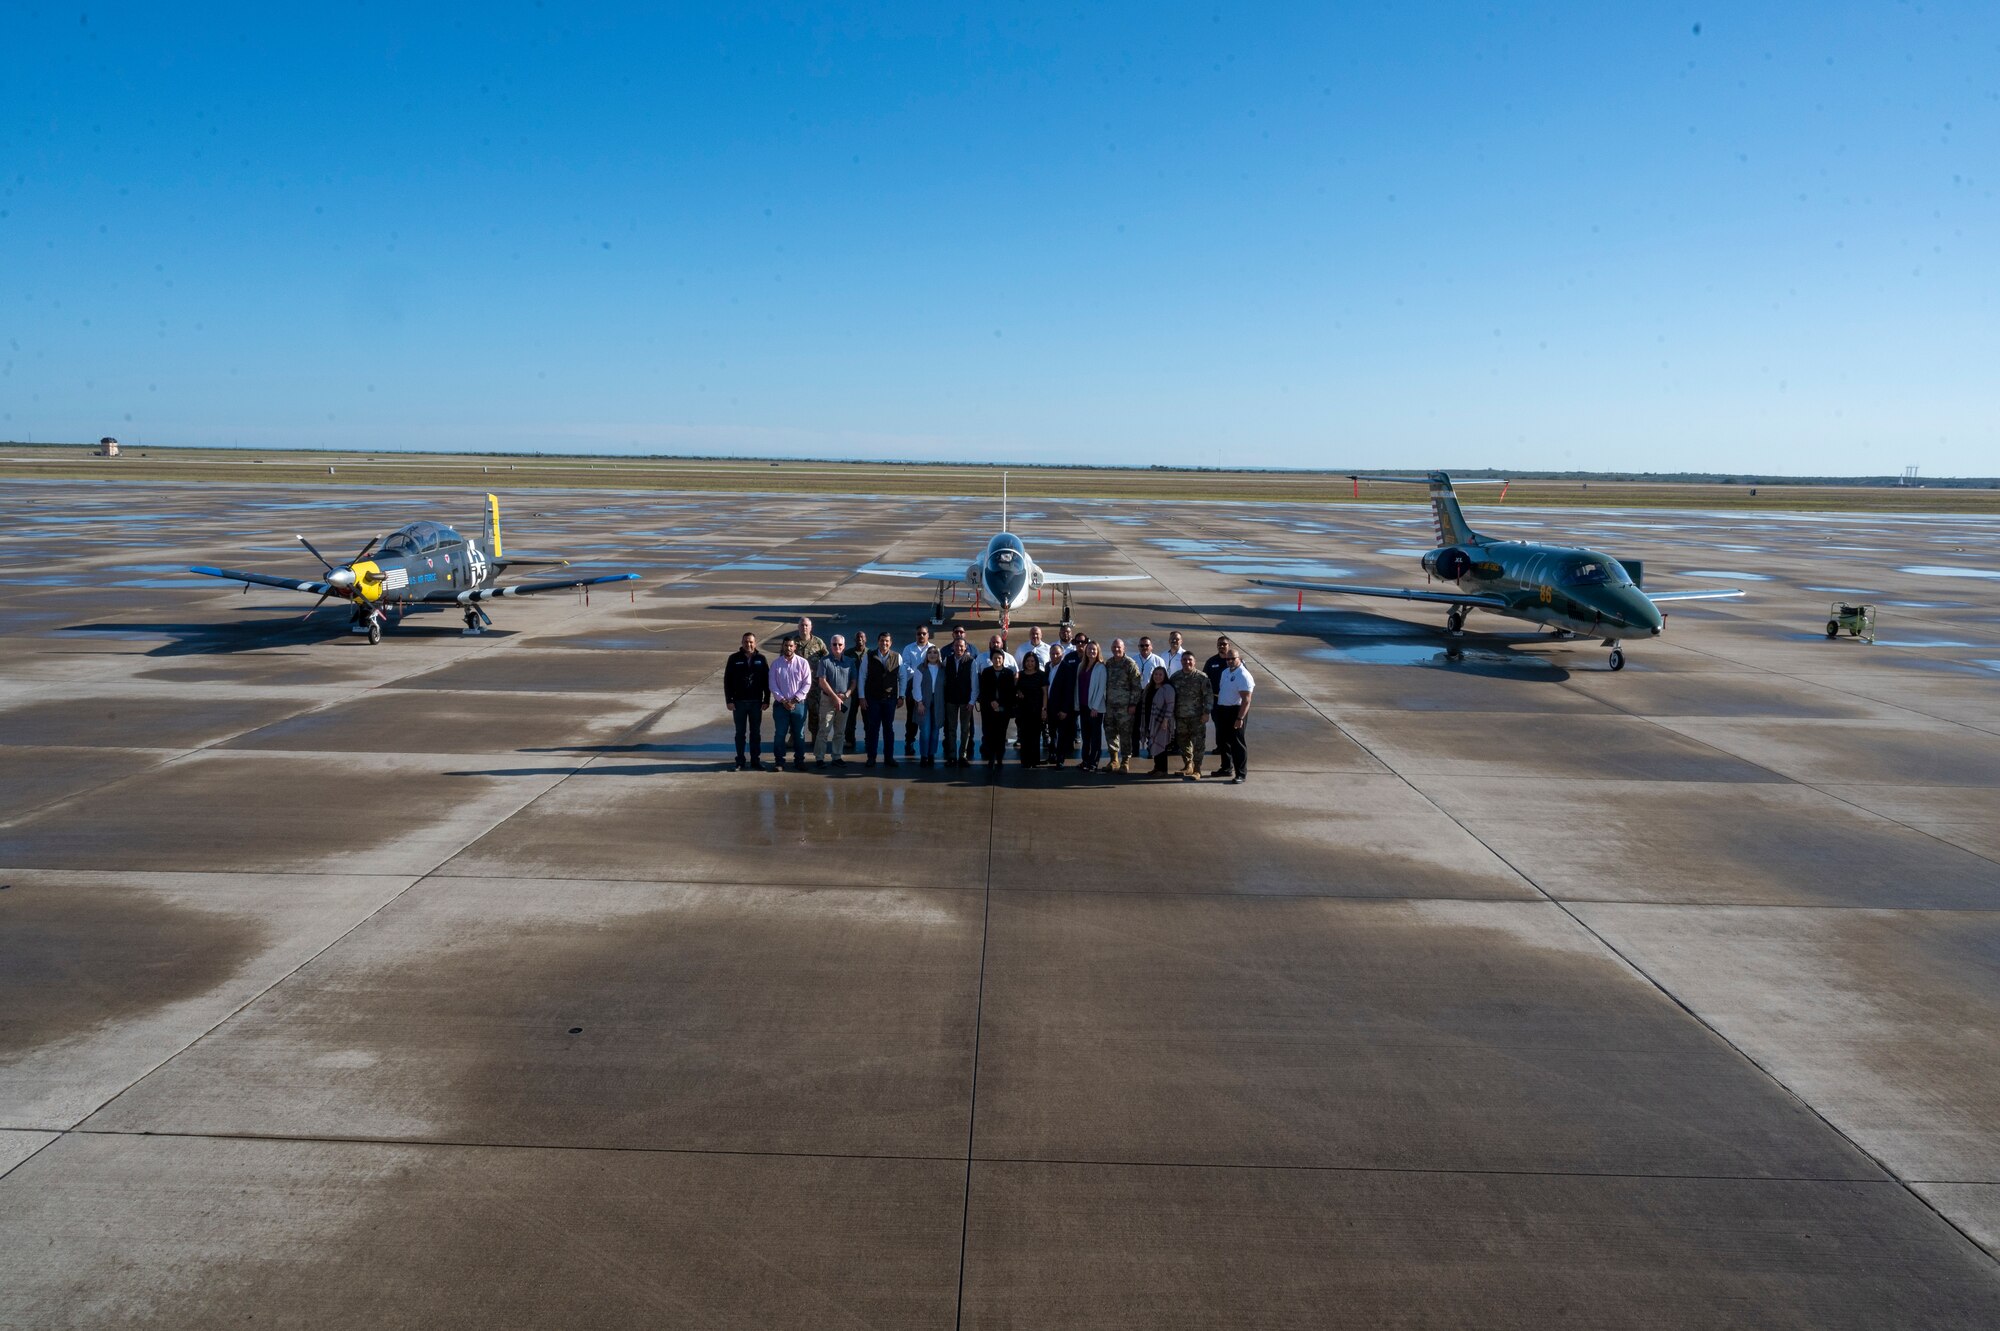 Laughlin leadership and distinguished visitors from Del Rio, Texas, and  Ciudad Acuna, Mexico, stand for a group photo in front of a T-1 Jayhawk, T-38C Talon, and a T-6A Texan II at Laughlin Air Force Base, Texas, Nov. 1, 2022. Laughlin’s mission is to develop U.S. Air Force pilots and the base relies on support from the local community to make that mission a success. Familiarization tours cultivate understating of the wing’s mission and help forge lasting partnerships in the community.  (U.S. Air Force photo by Senior Airman Nicholas Larsen)